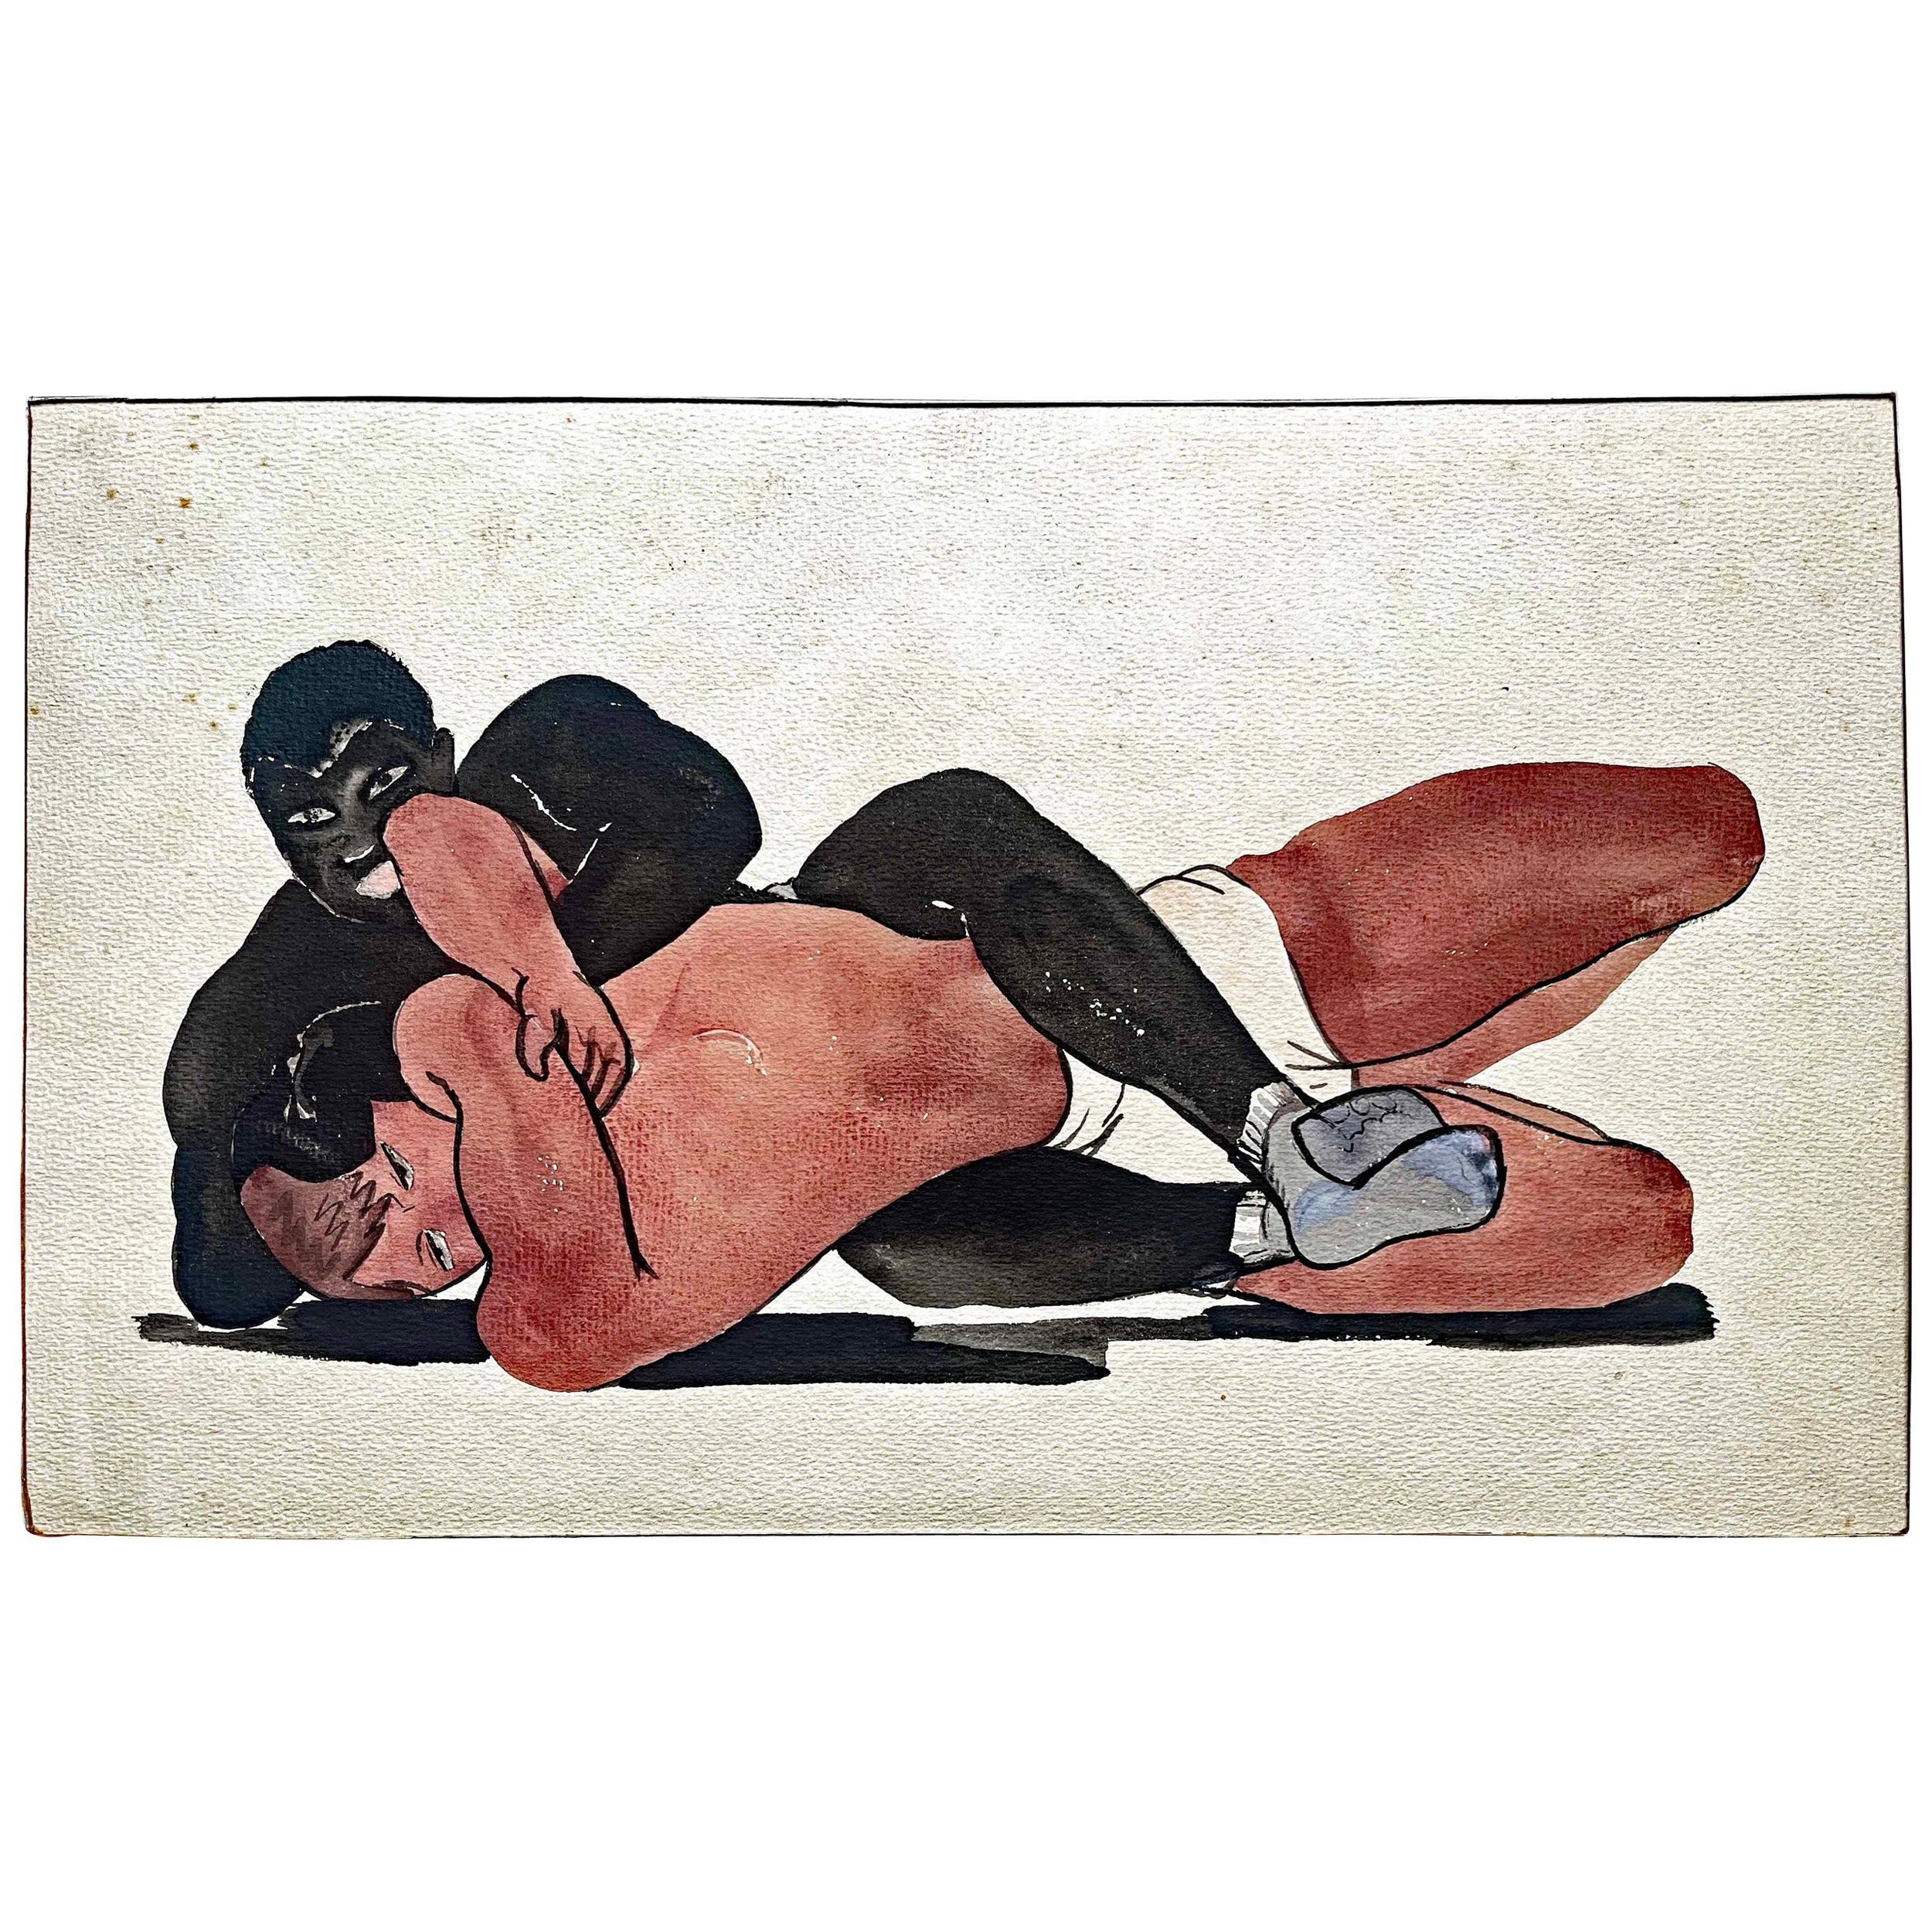 "Pinned Down", Wrestling Scene from Late 1920s by William L'Engle